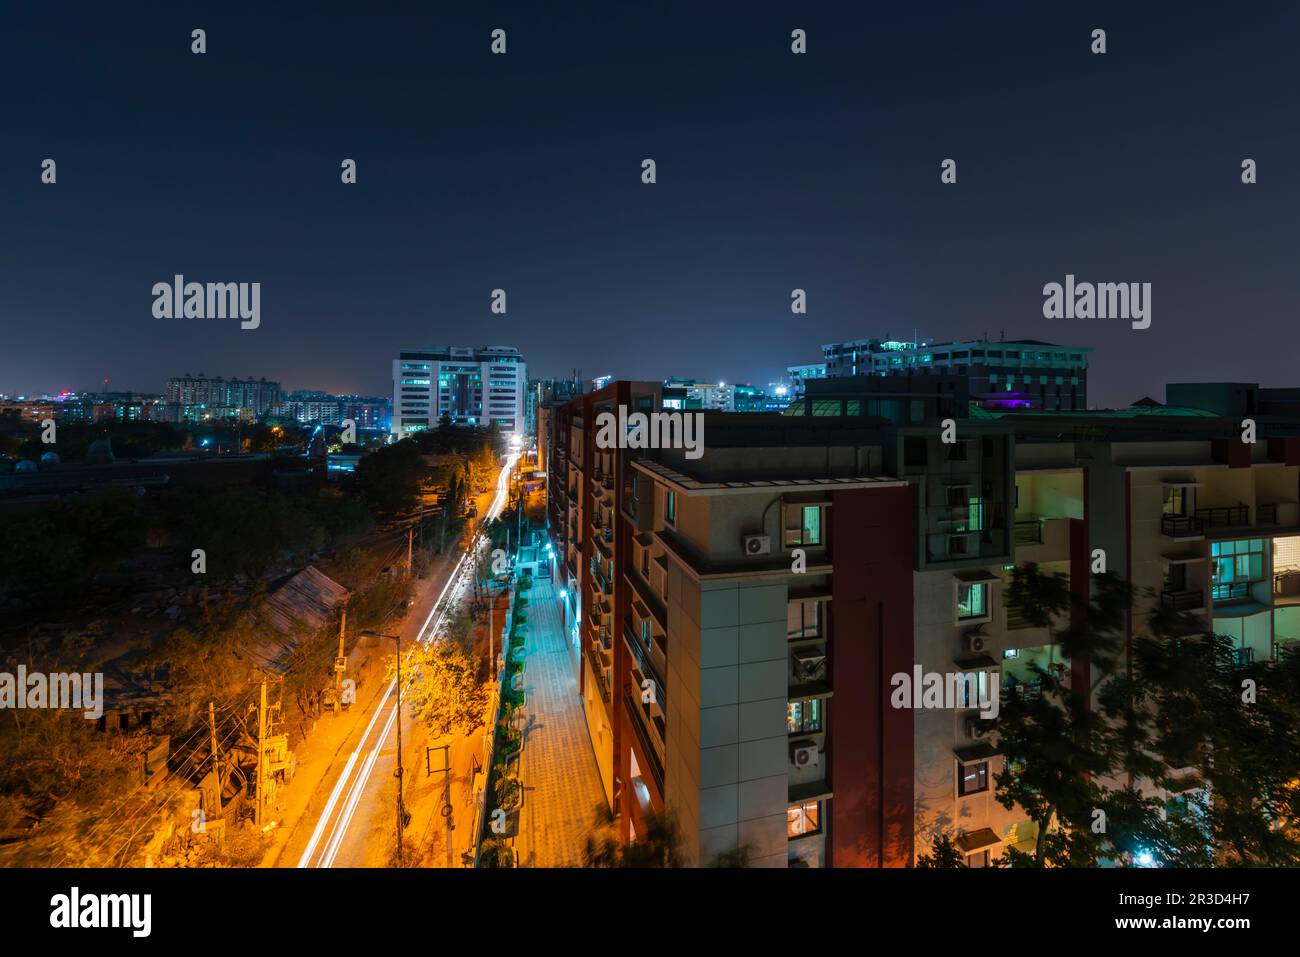 A nightscape of Kondapur, Hyderabad, Telangana. Light trails from vehicles entering or leaving Whitefields . Stock Photo